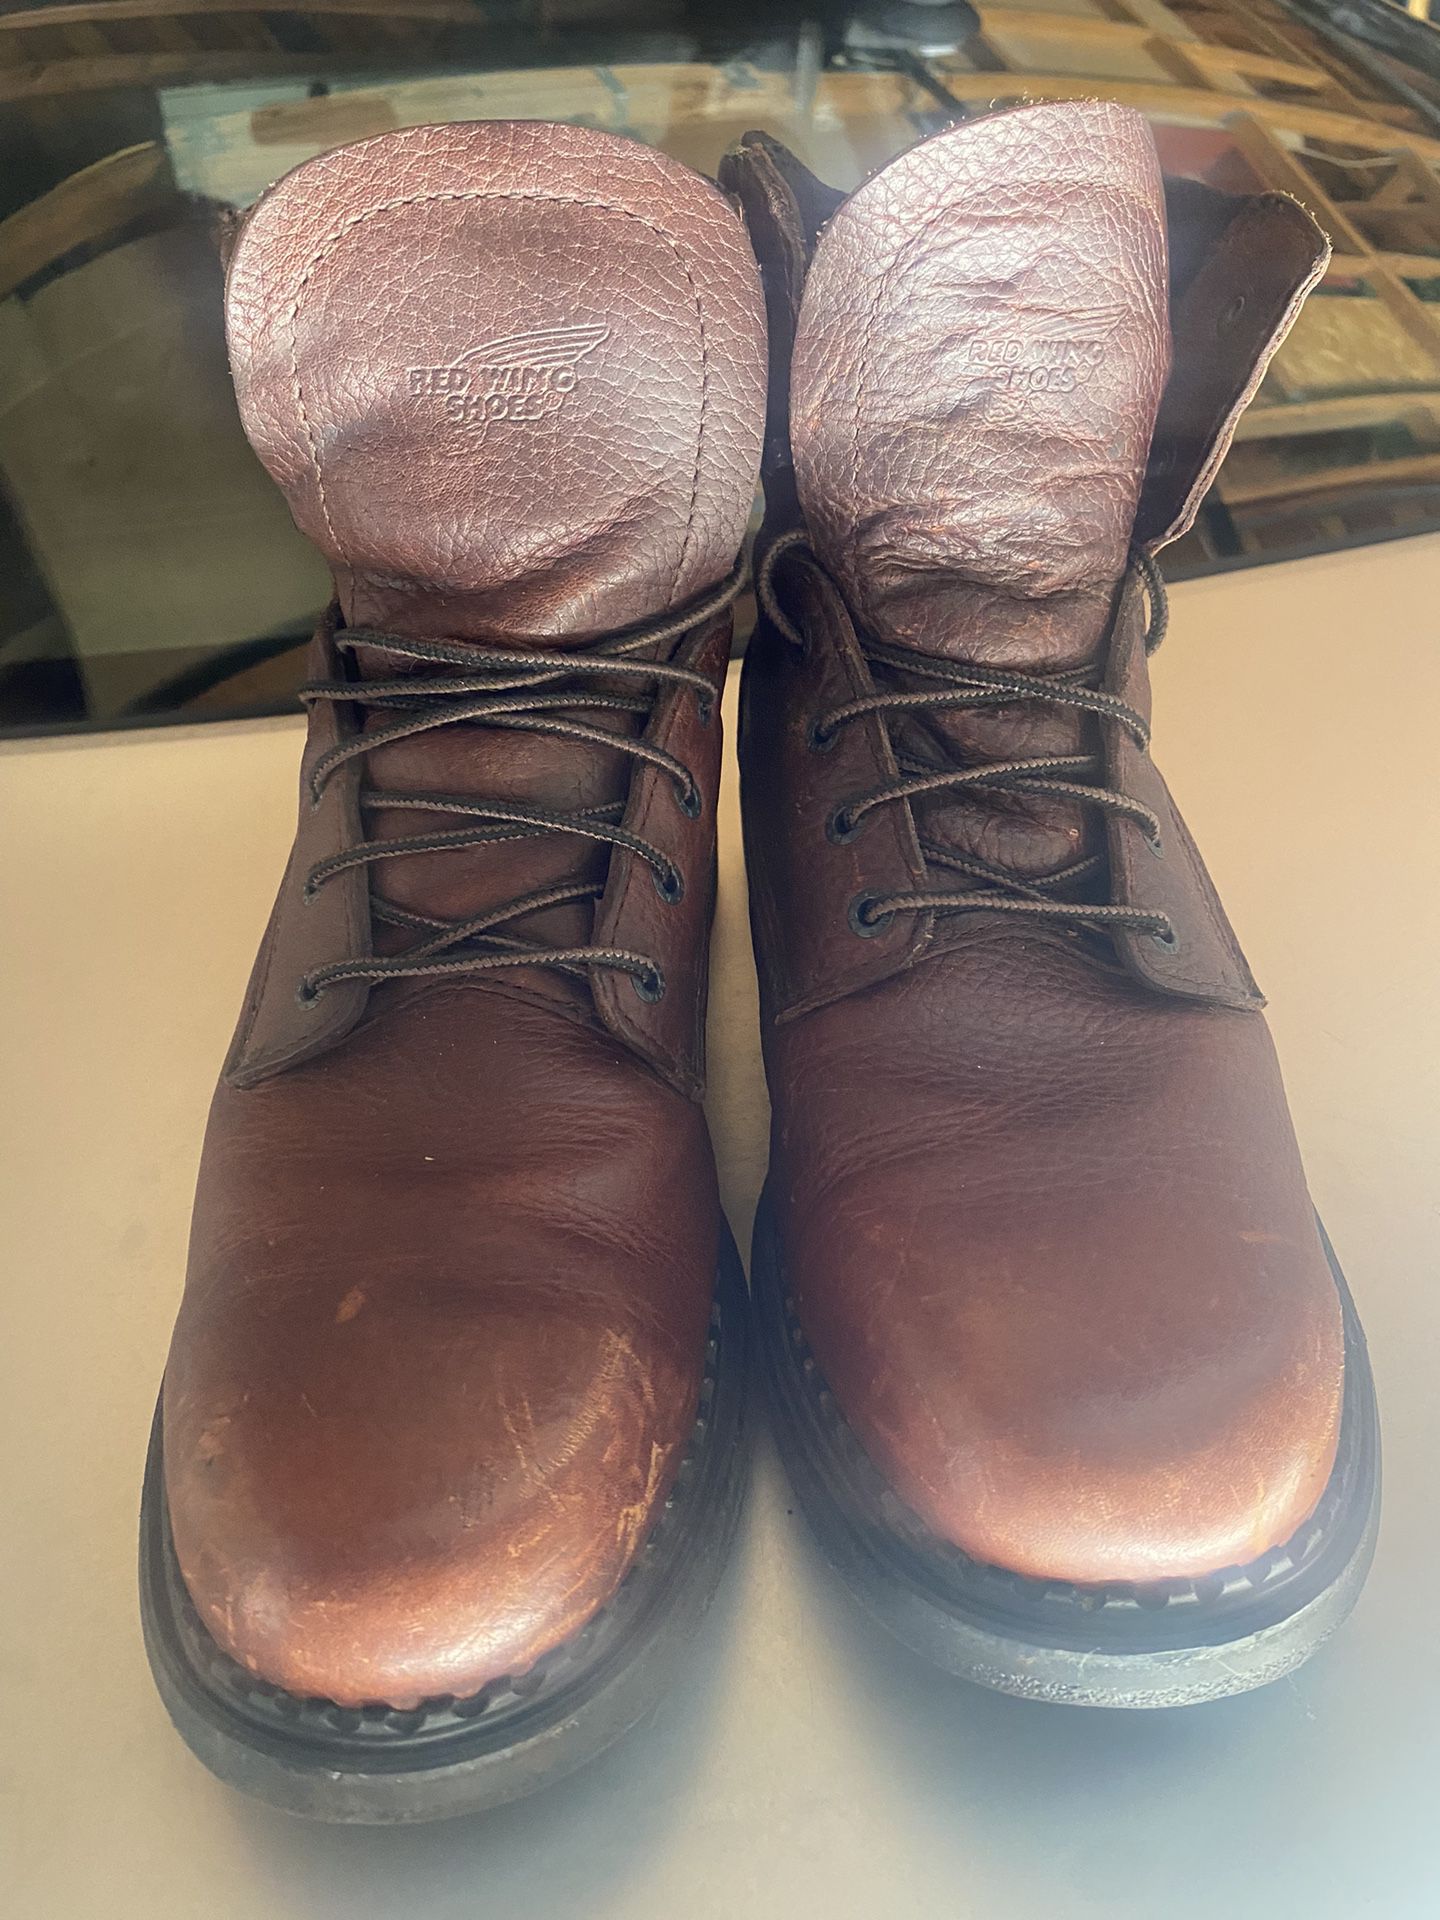 Red Wing Shoes / Work Boots Size 12 $40